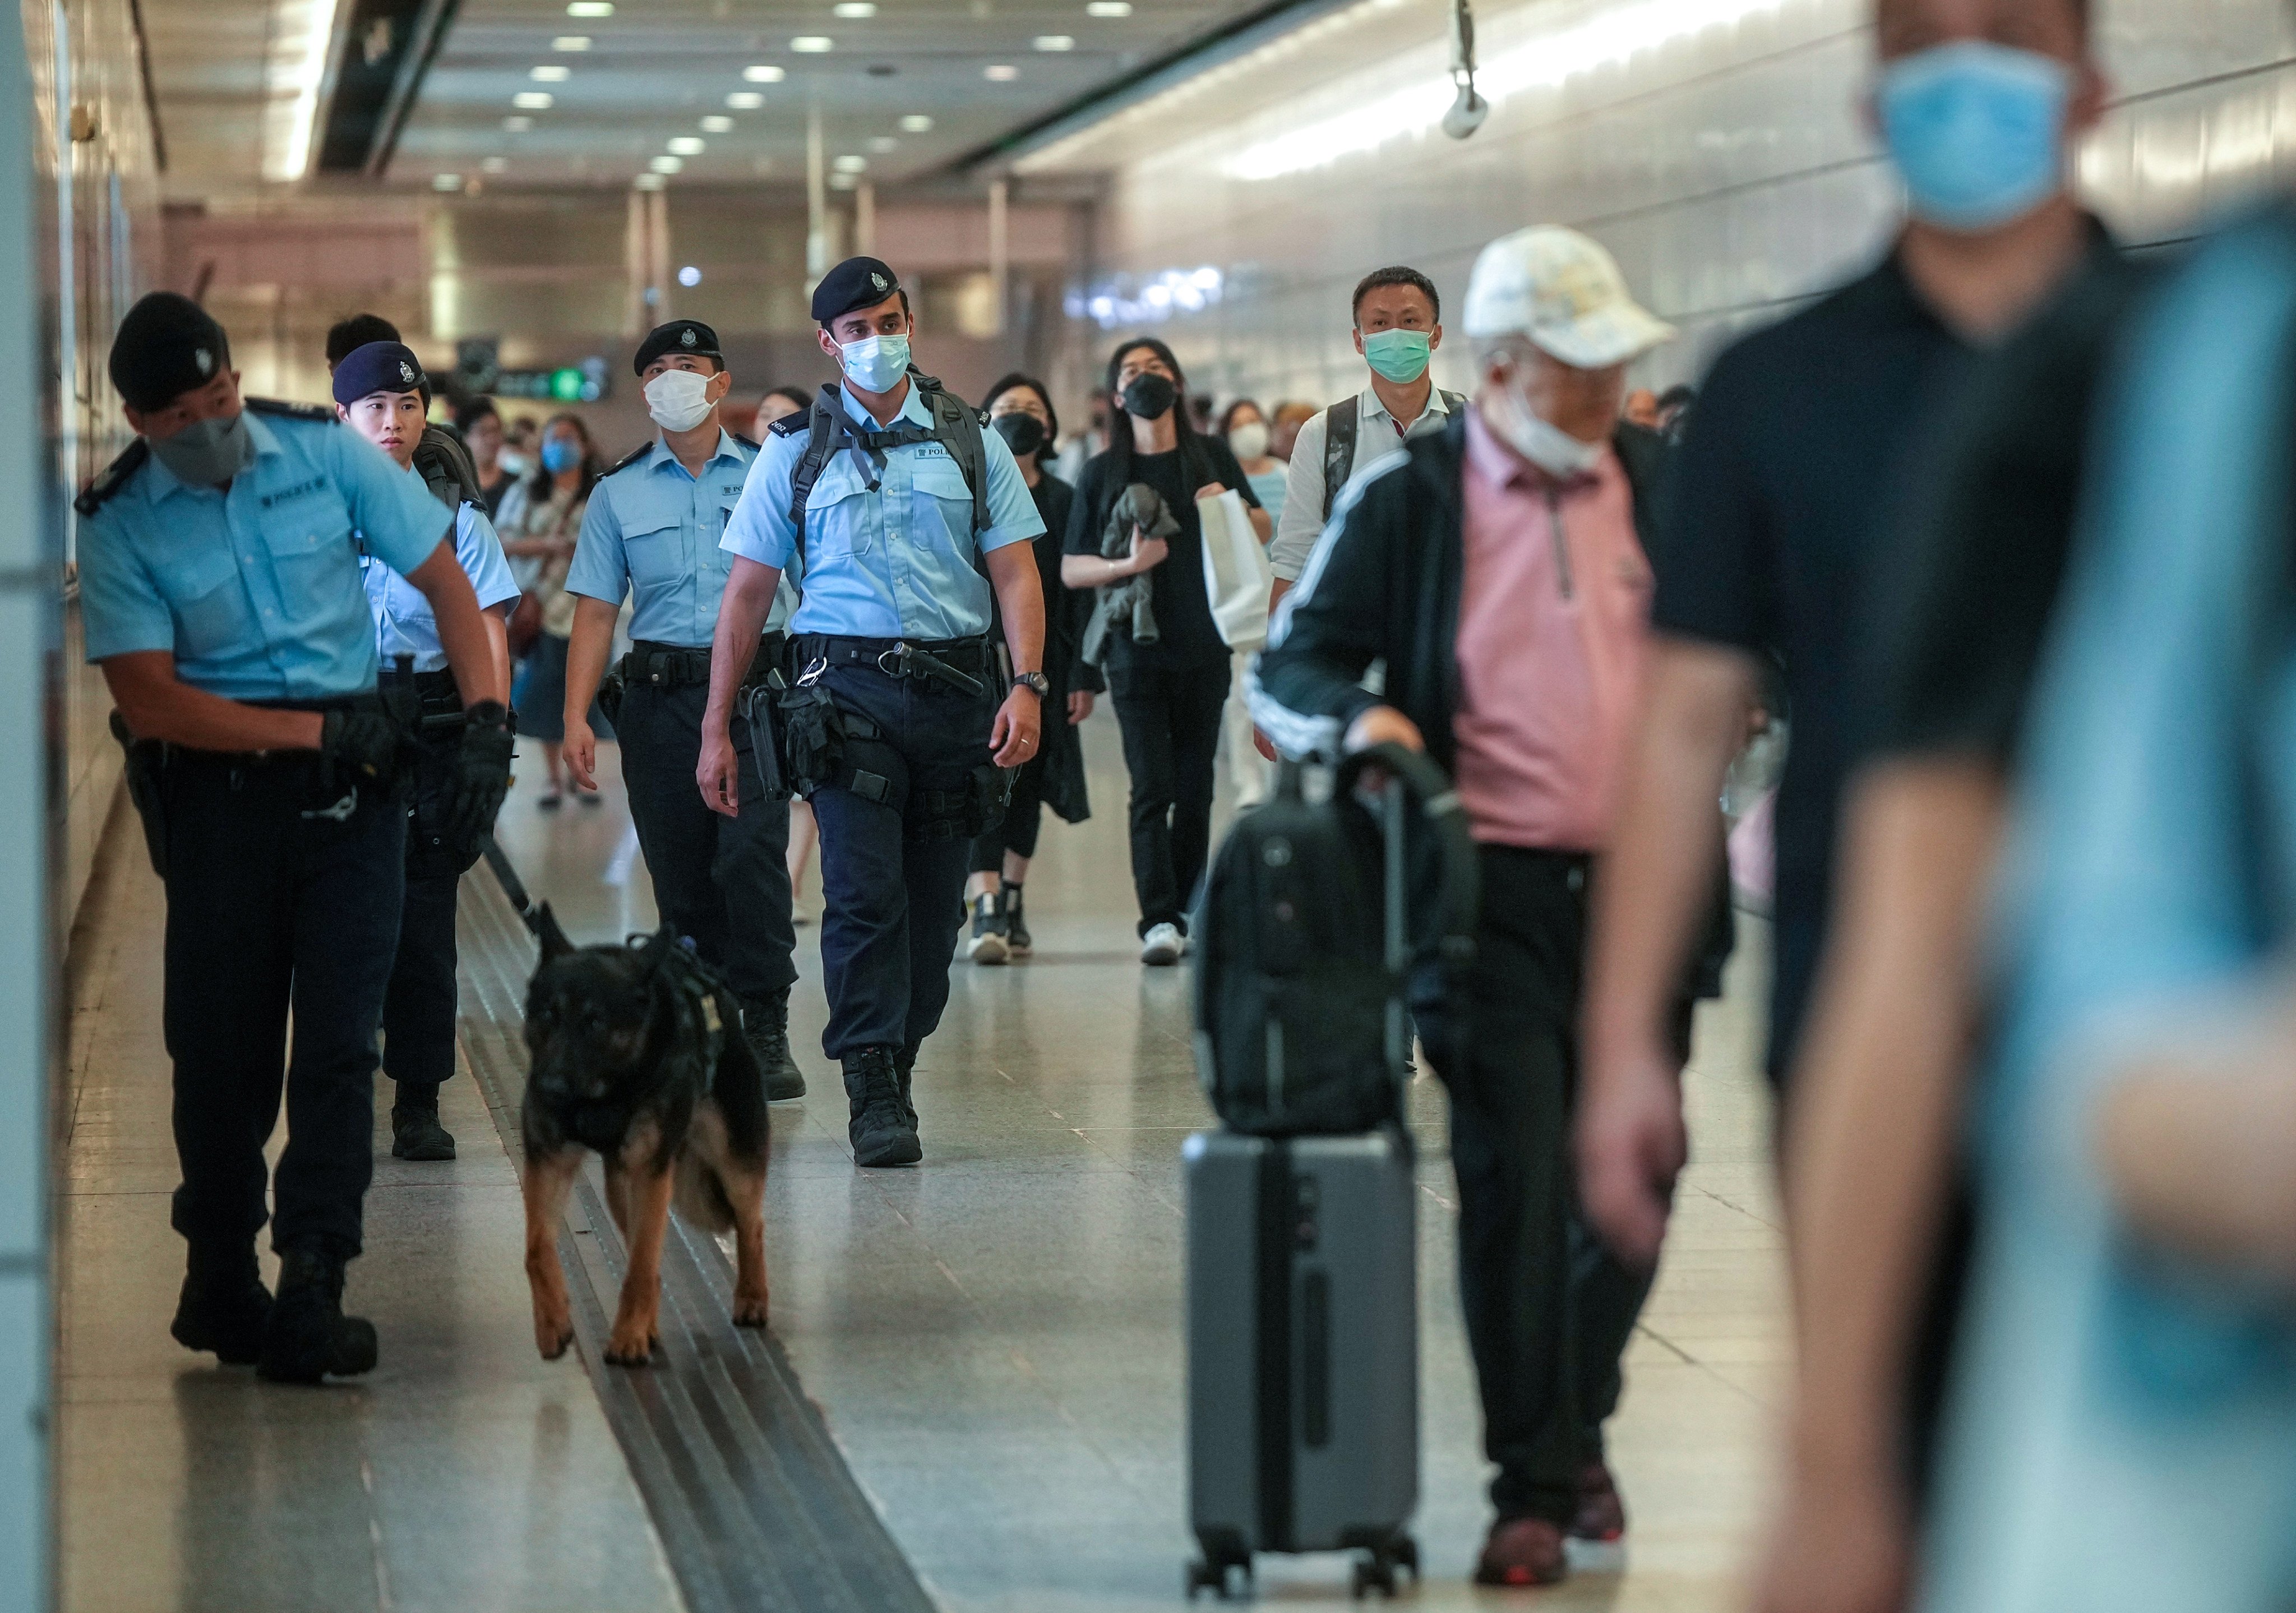 Police officers on patrol in Hong Kong MTR station. Photo: Elson Li